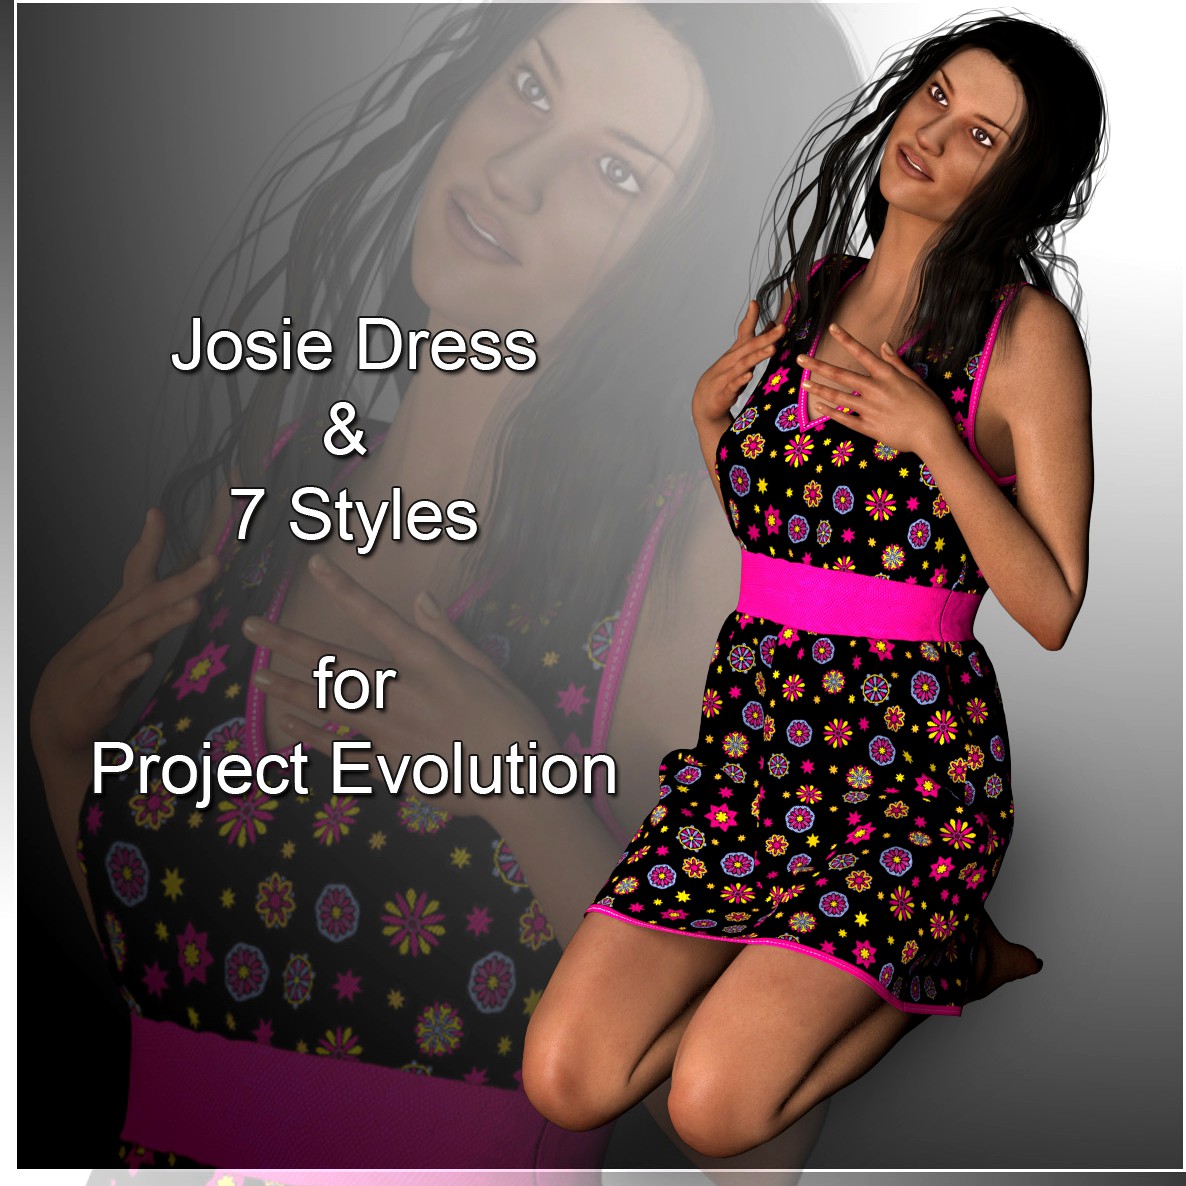 Josie Dress and 7 Styles for Project Evolution - Poser